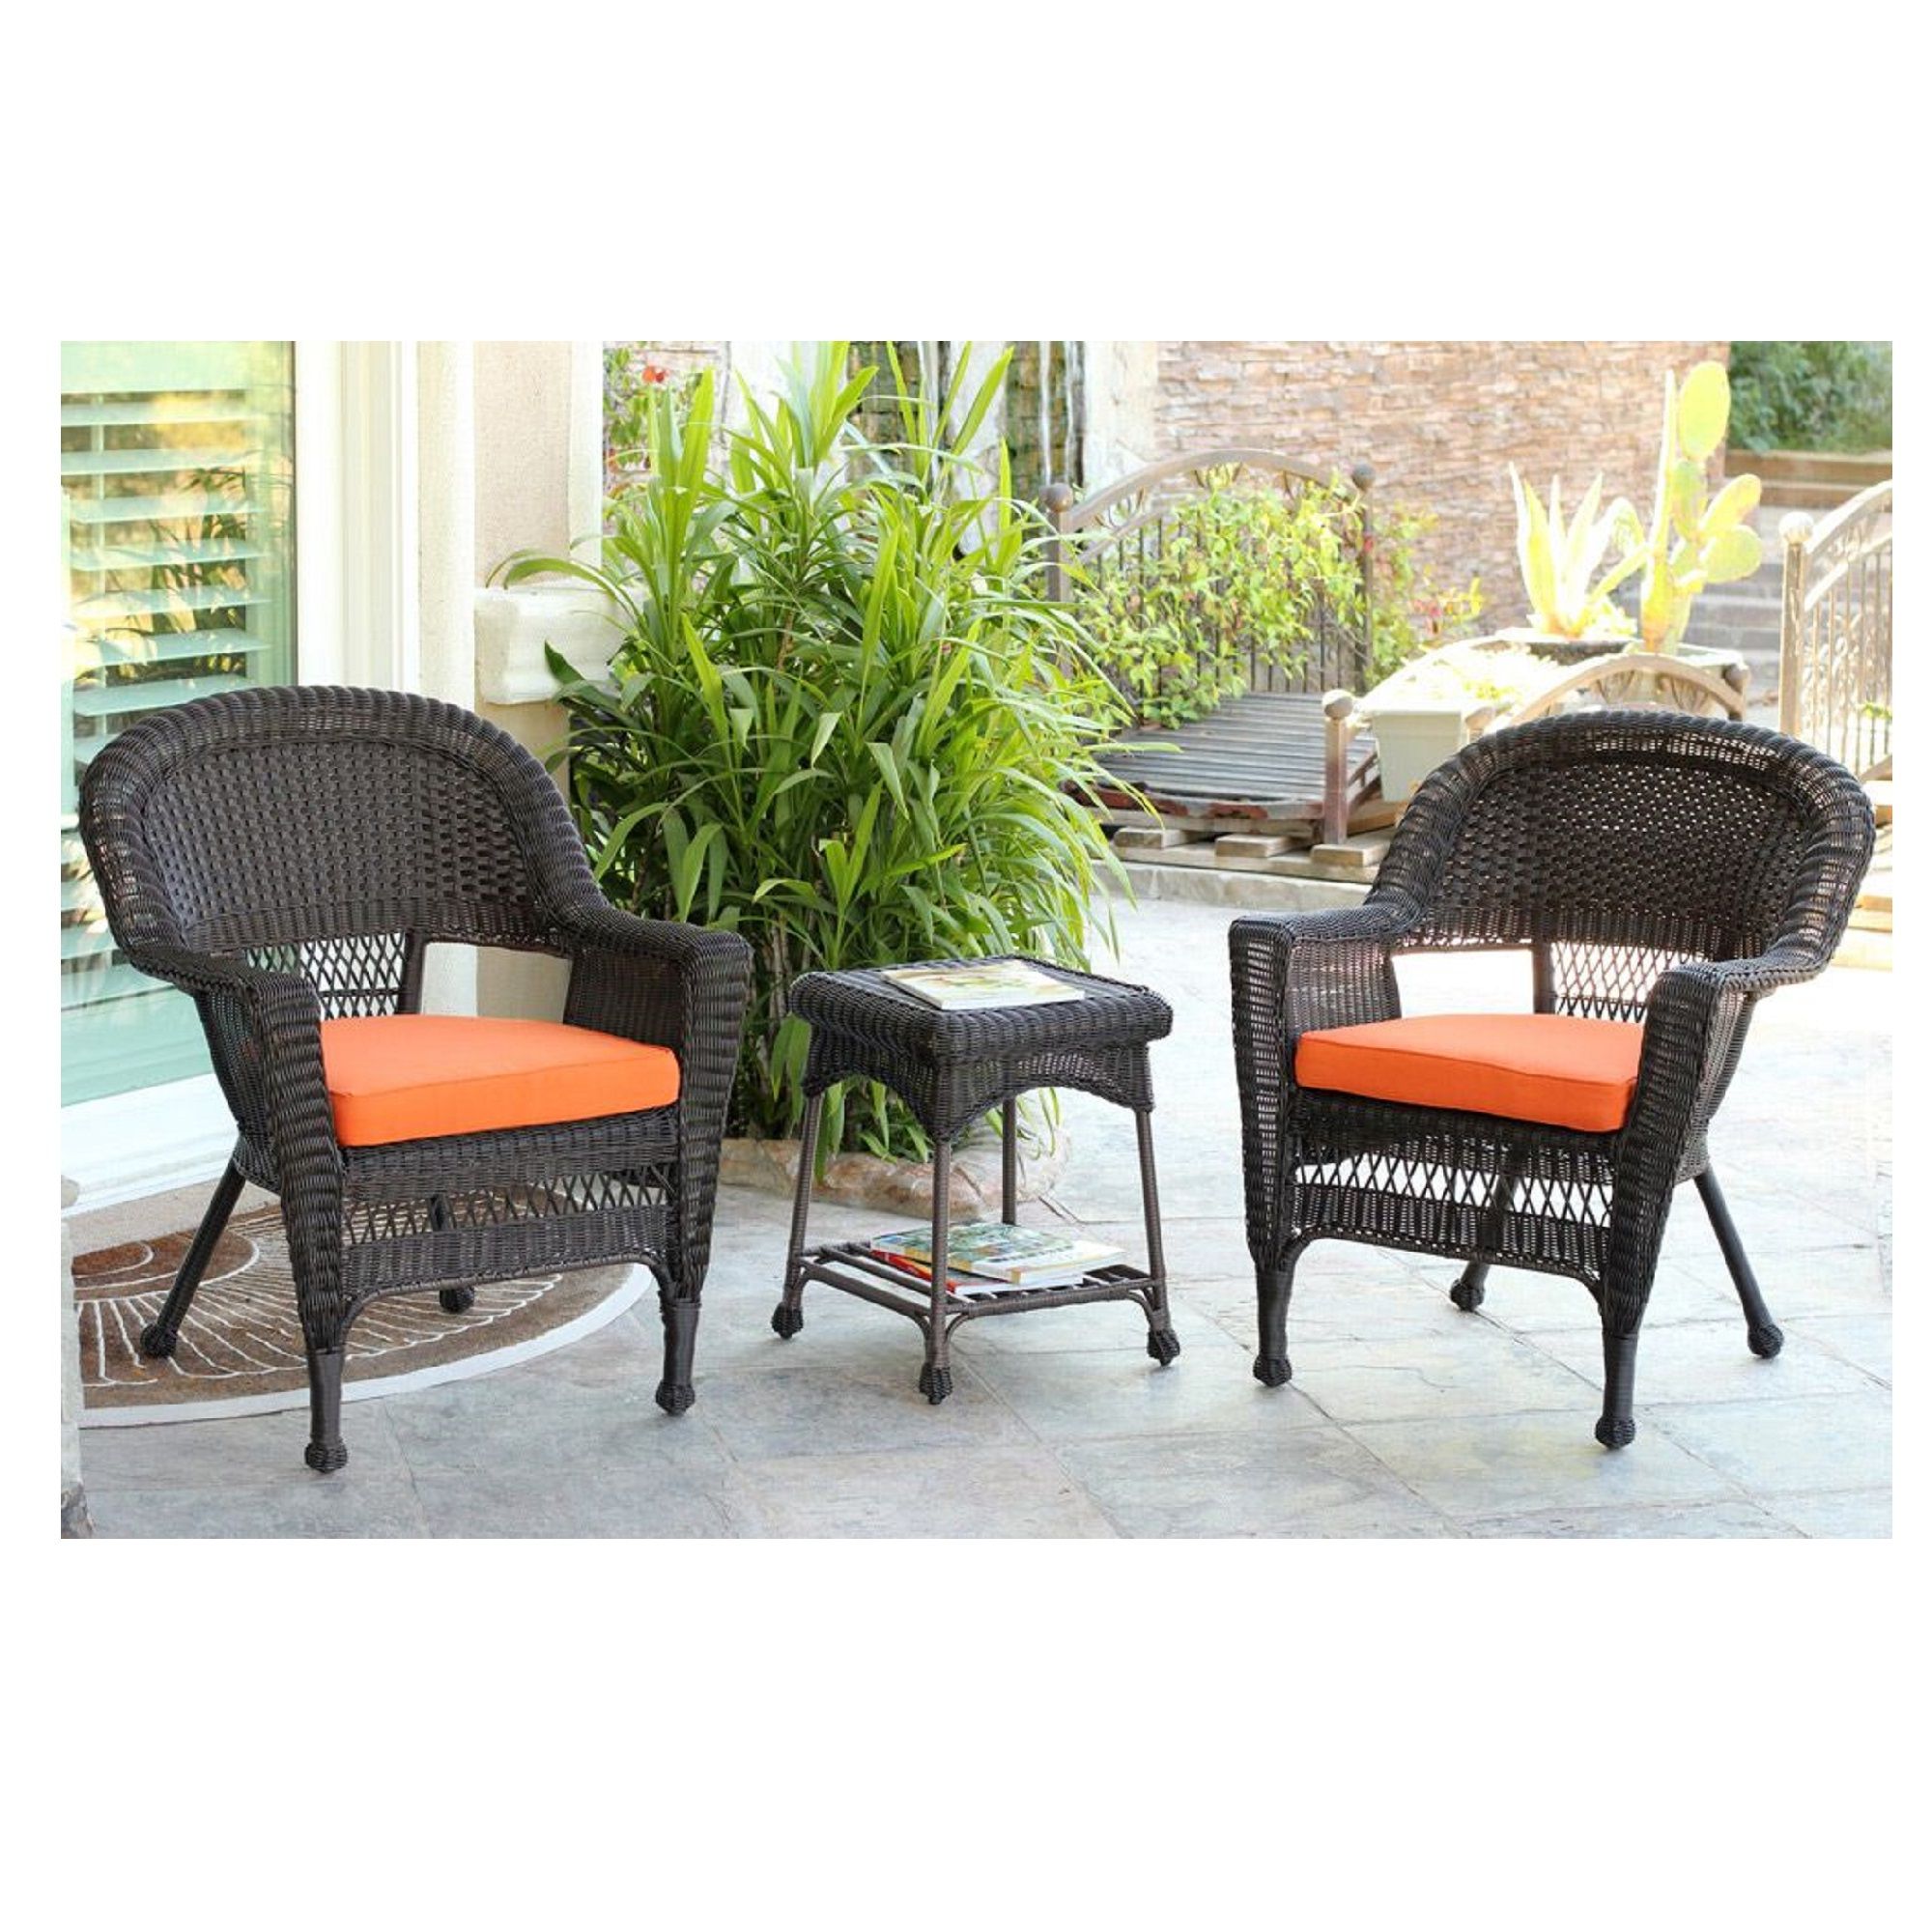 Outdoor Wicker Orange Cushion Patio Sets Within Fashionable Set Of 3 Espresso Brown Resin Wicker Patio Chairs And End Table (View 11 of 15)